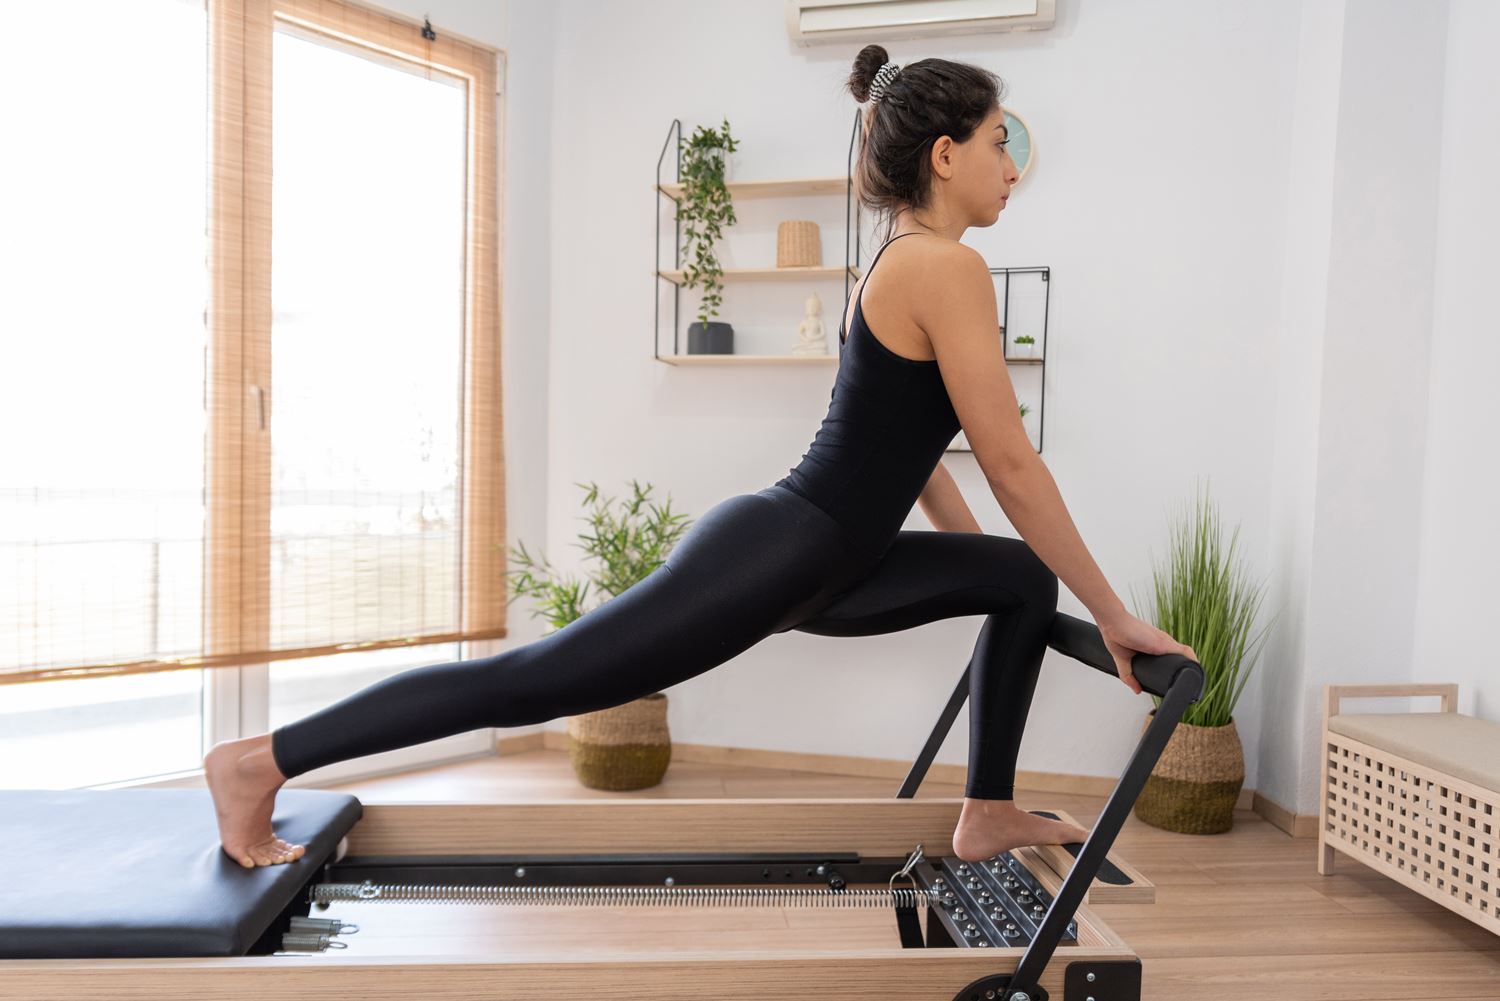 Los Gatos: Which Pilates method is right for you? — x2o Blog